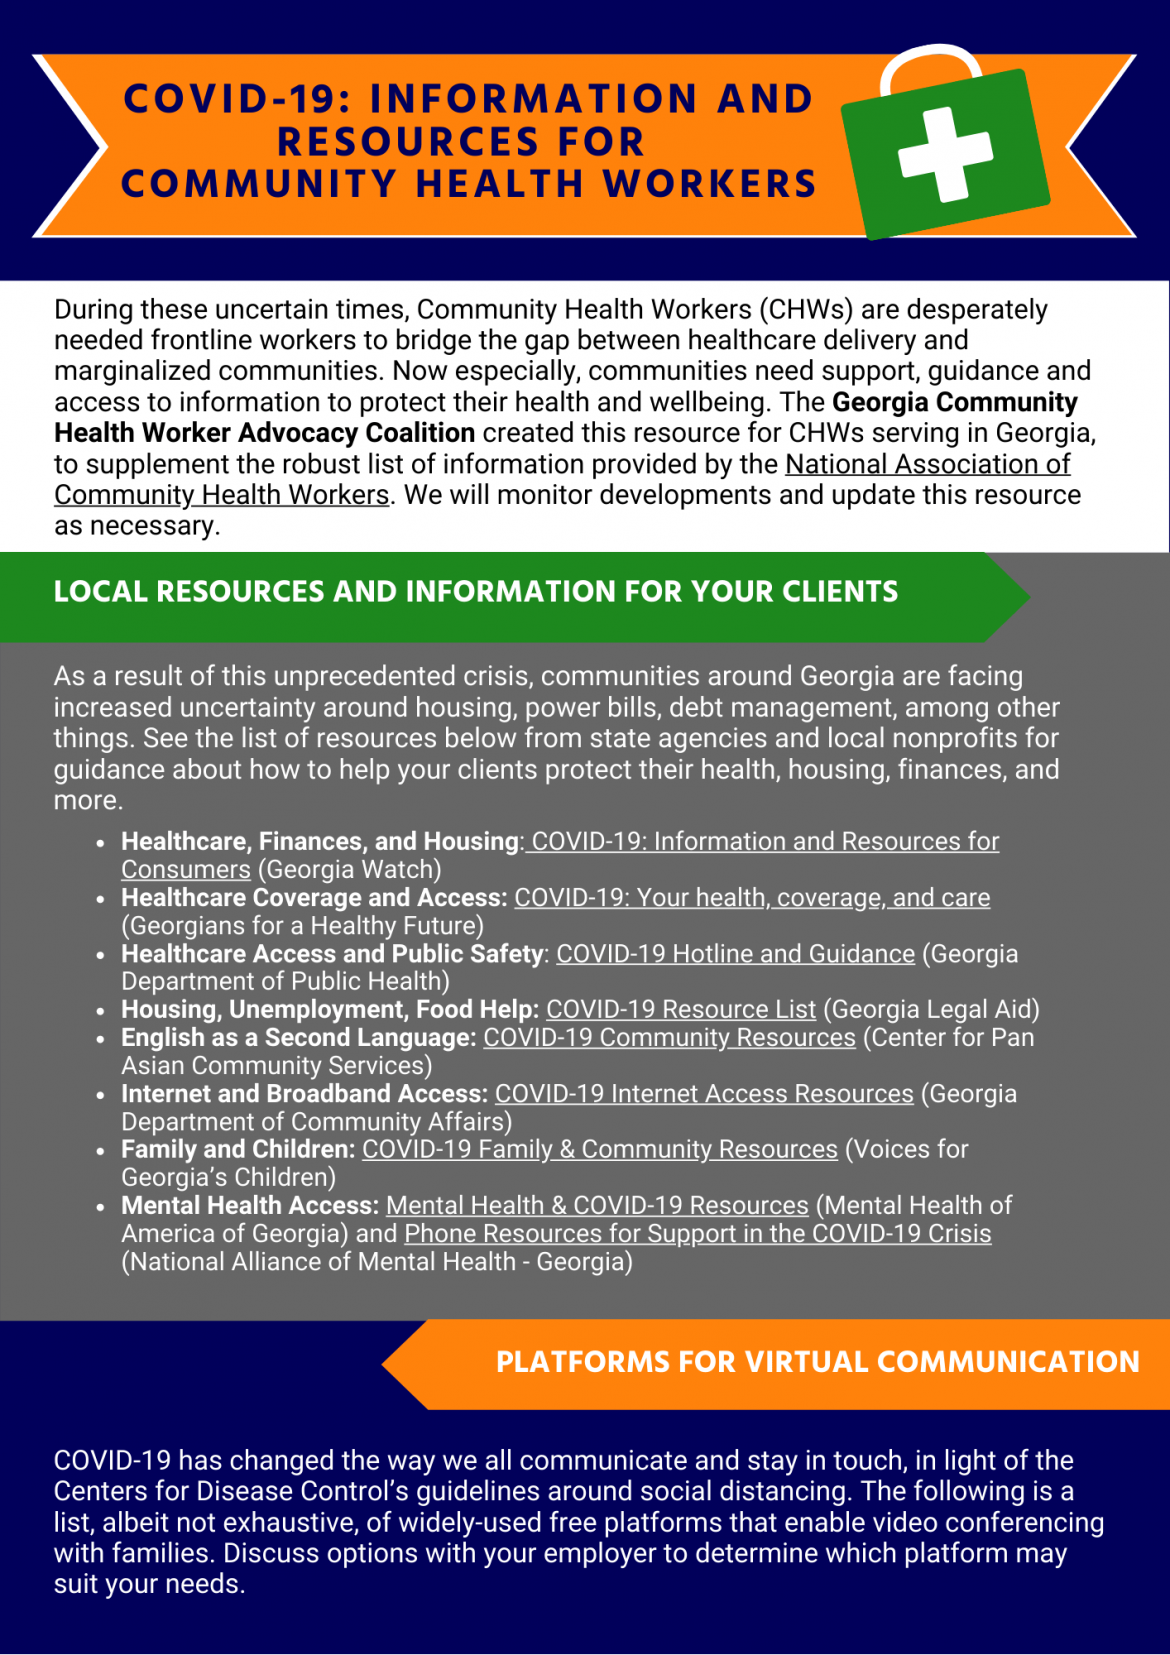 Covid-19-Information-and-Resources-for-CHWs-4.20.png